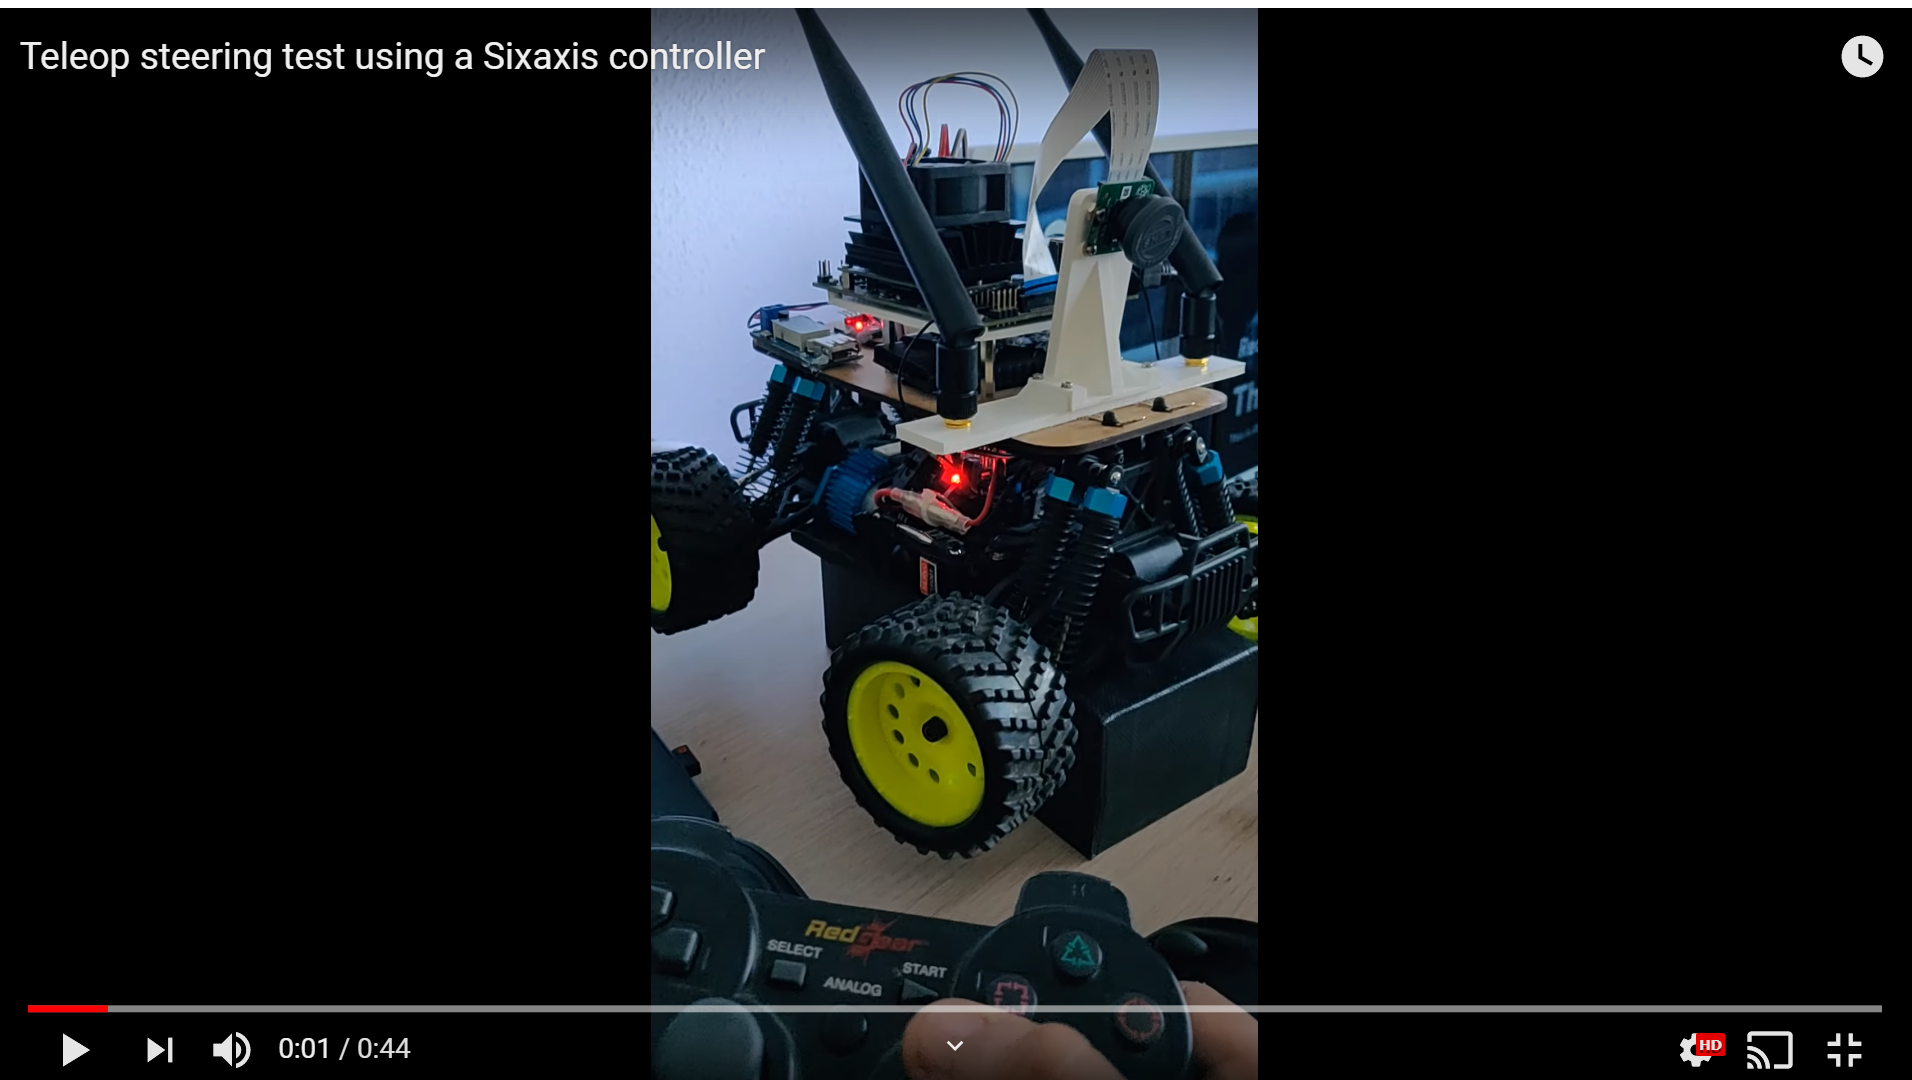 Static steering test: Sixaxis Controller